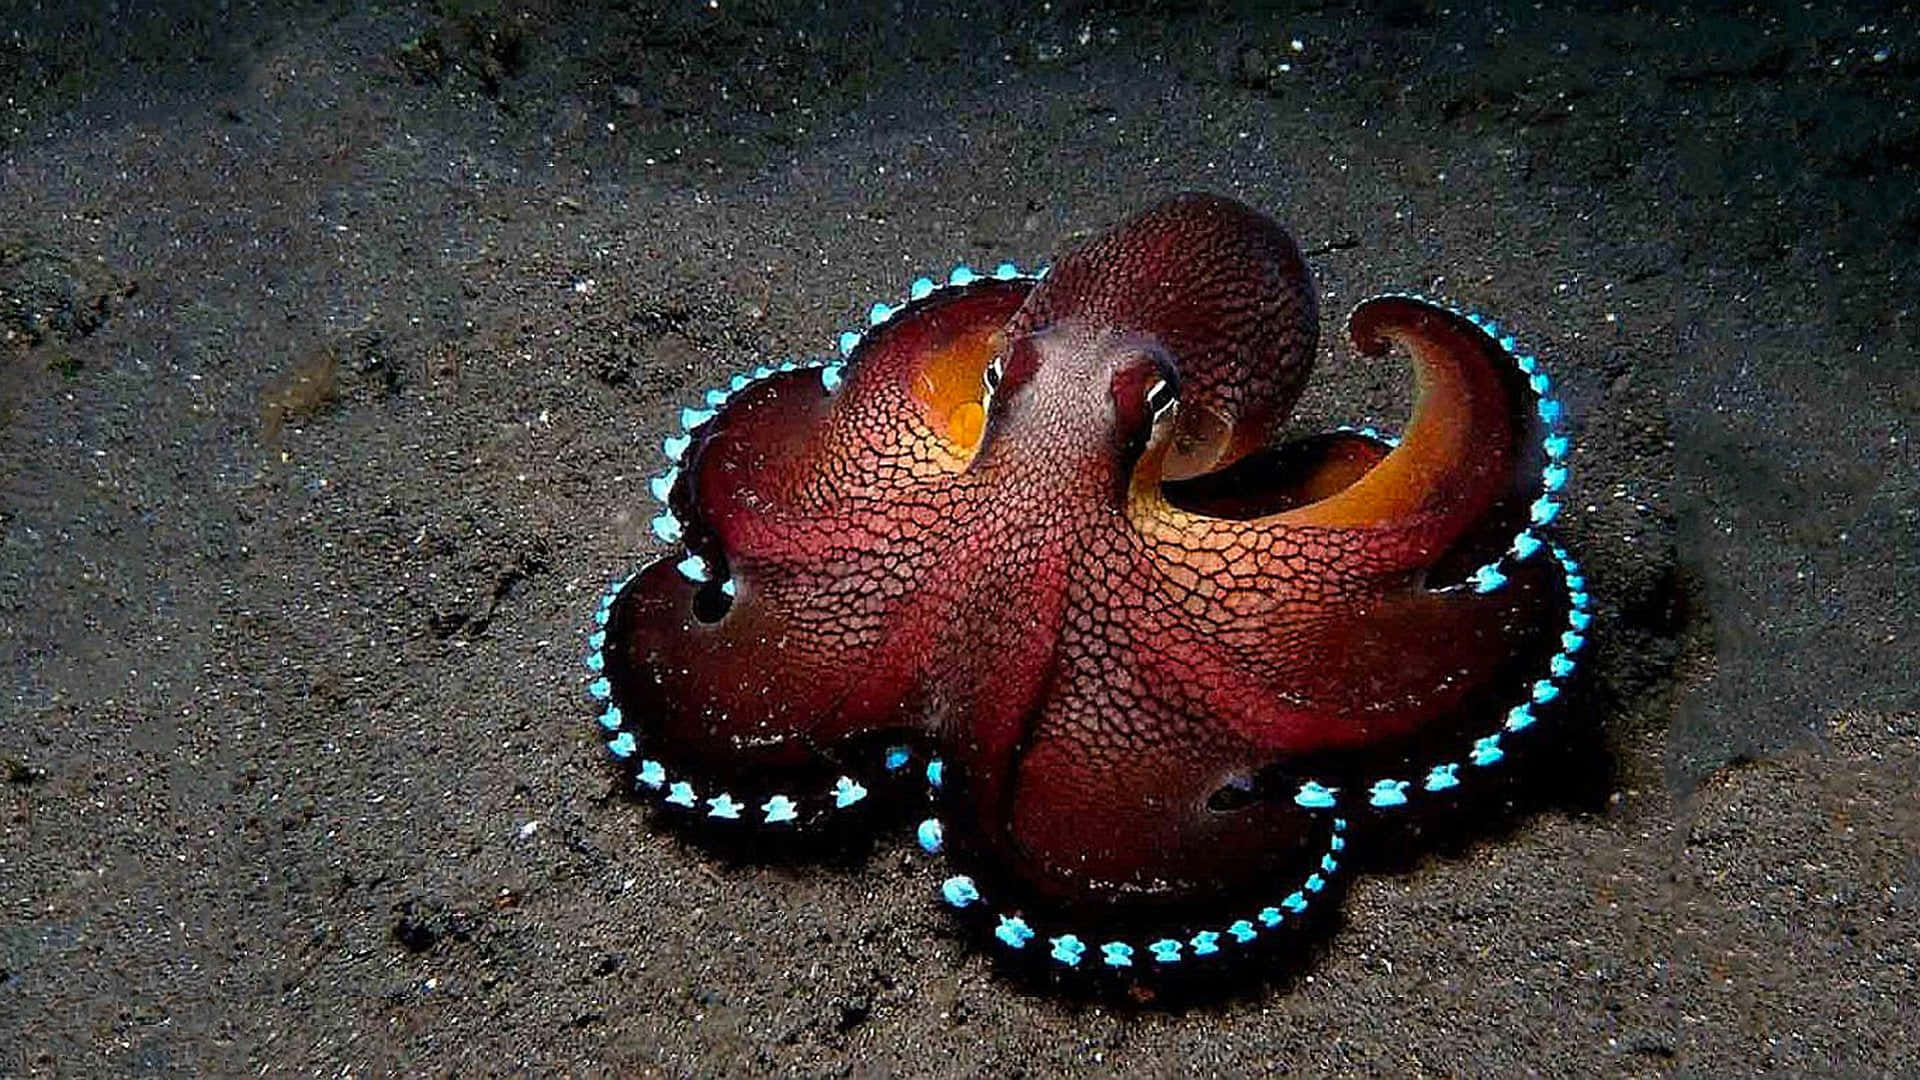 A close-up view of an octopus's fascinating features